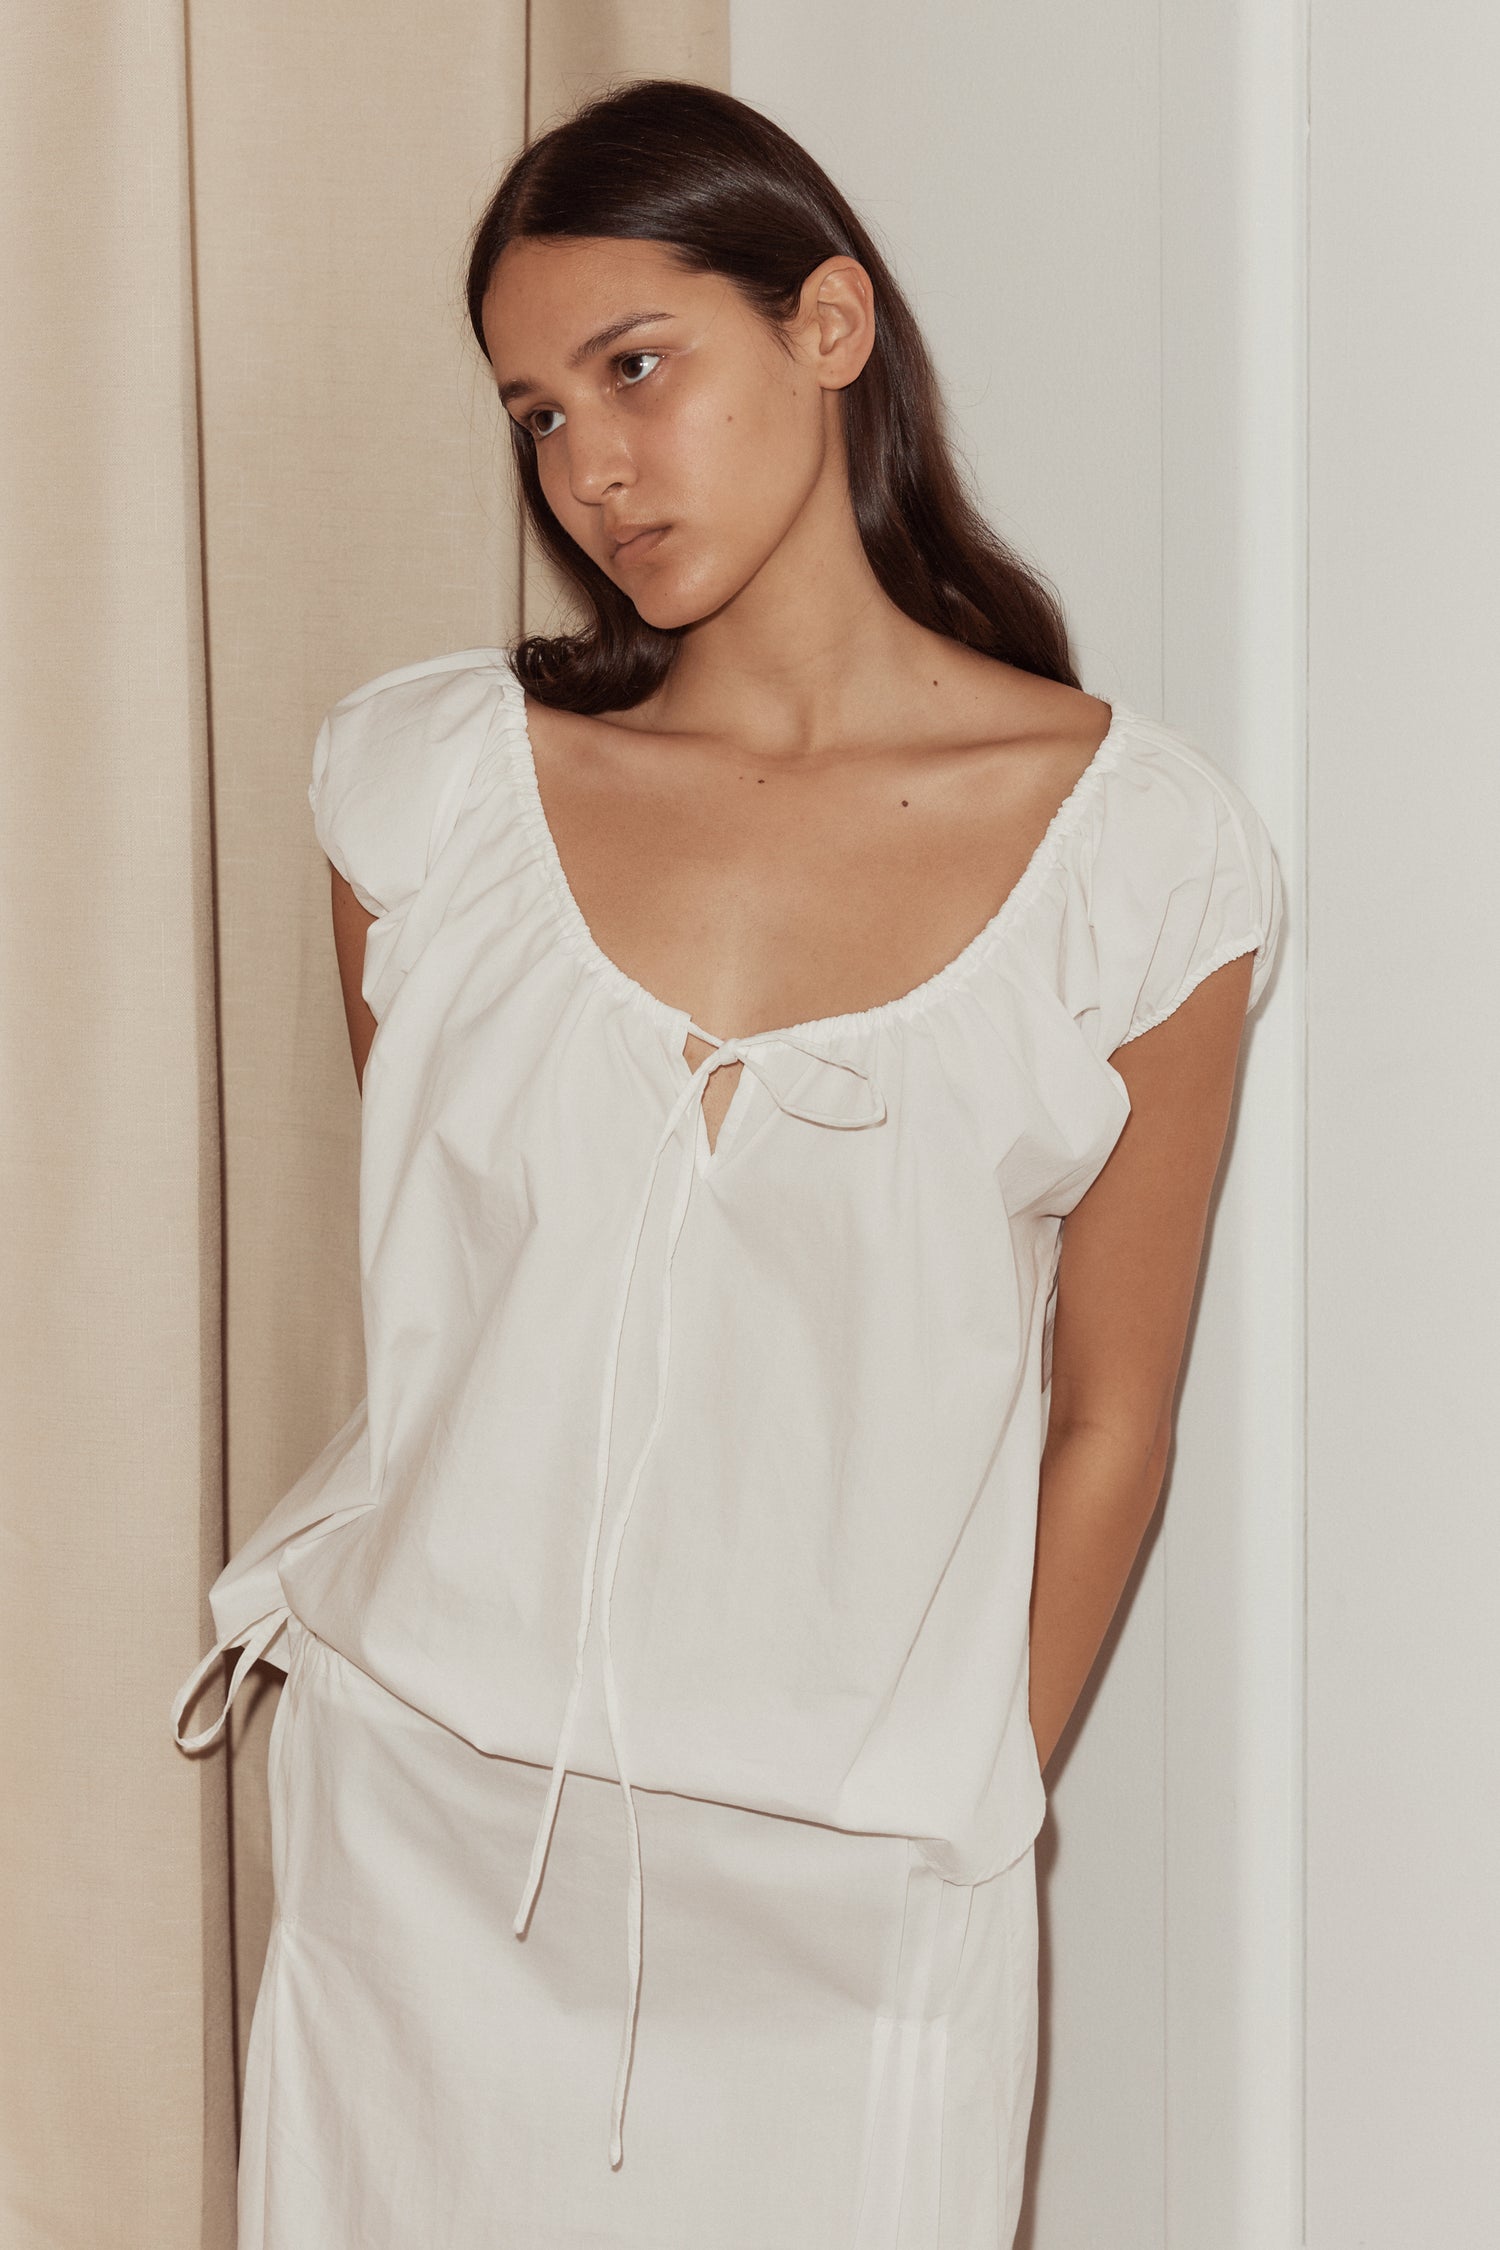 close up shot female model wearing one panel top by Deiji Studios in white. Elevated everyday top with capped sleeves features an adjustable gathered neckline with bow and keyhole detail. Styled with pintuck skirt in white.